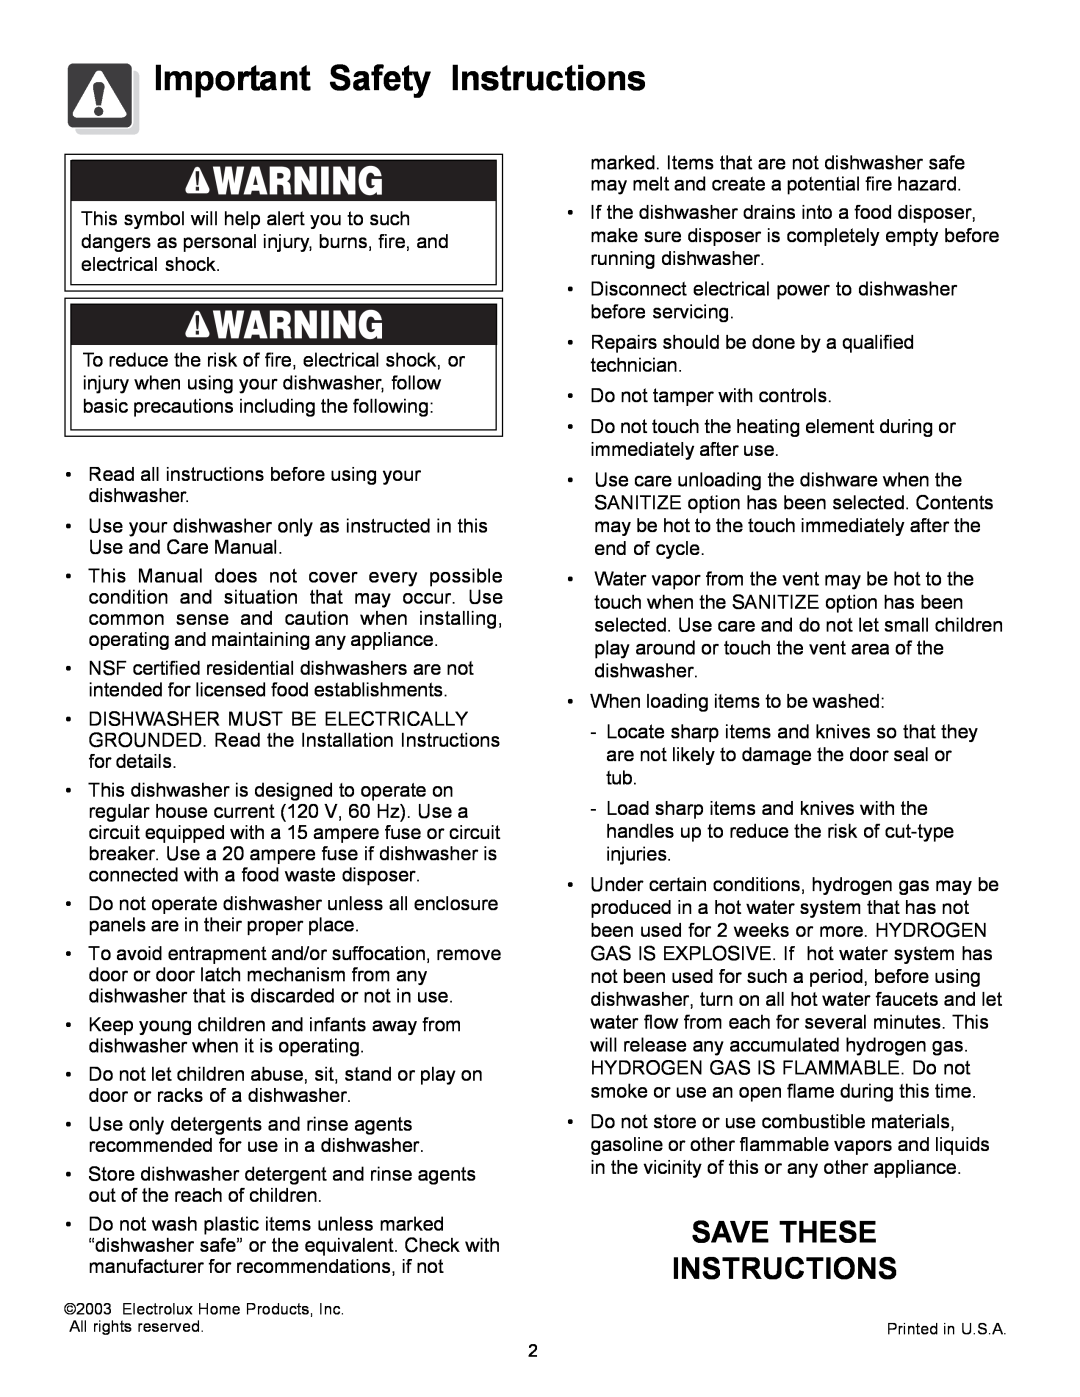 Frigidaire 4000 warranty Important Safety Instructions, Save These Instructions 